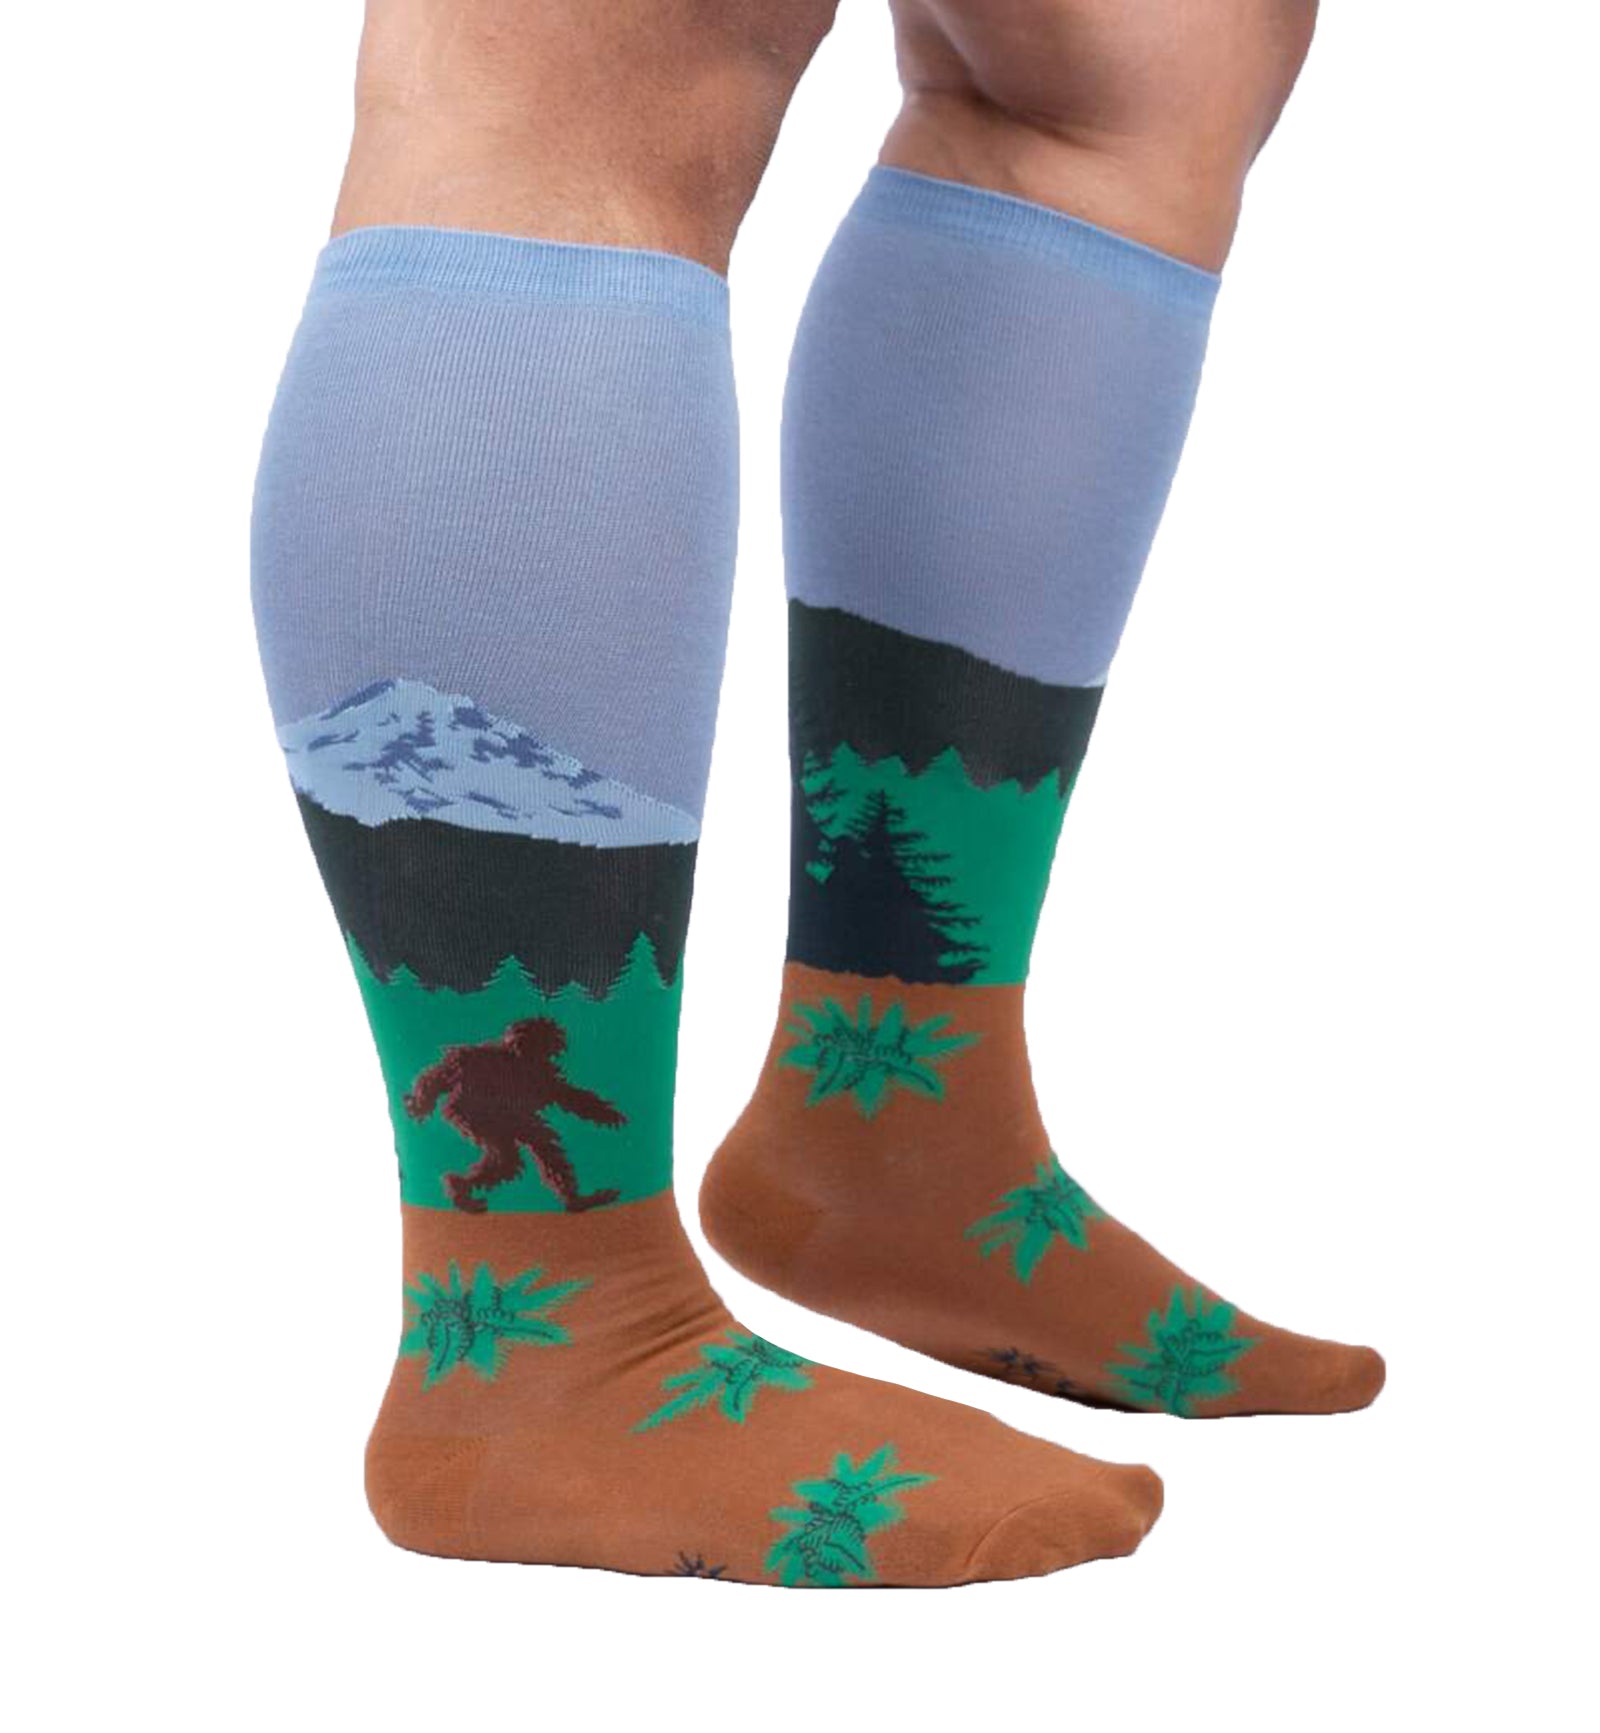 SOCK it to me Unisex Stretch-It Knee High Socks (S0158),Welcome to my Hood - Welcome to my Hood,One Size